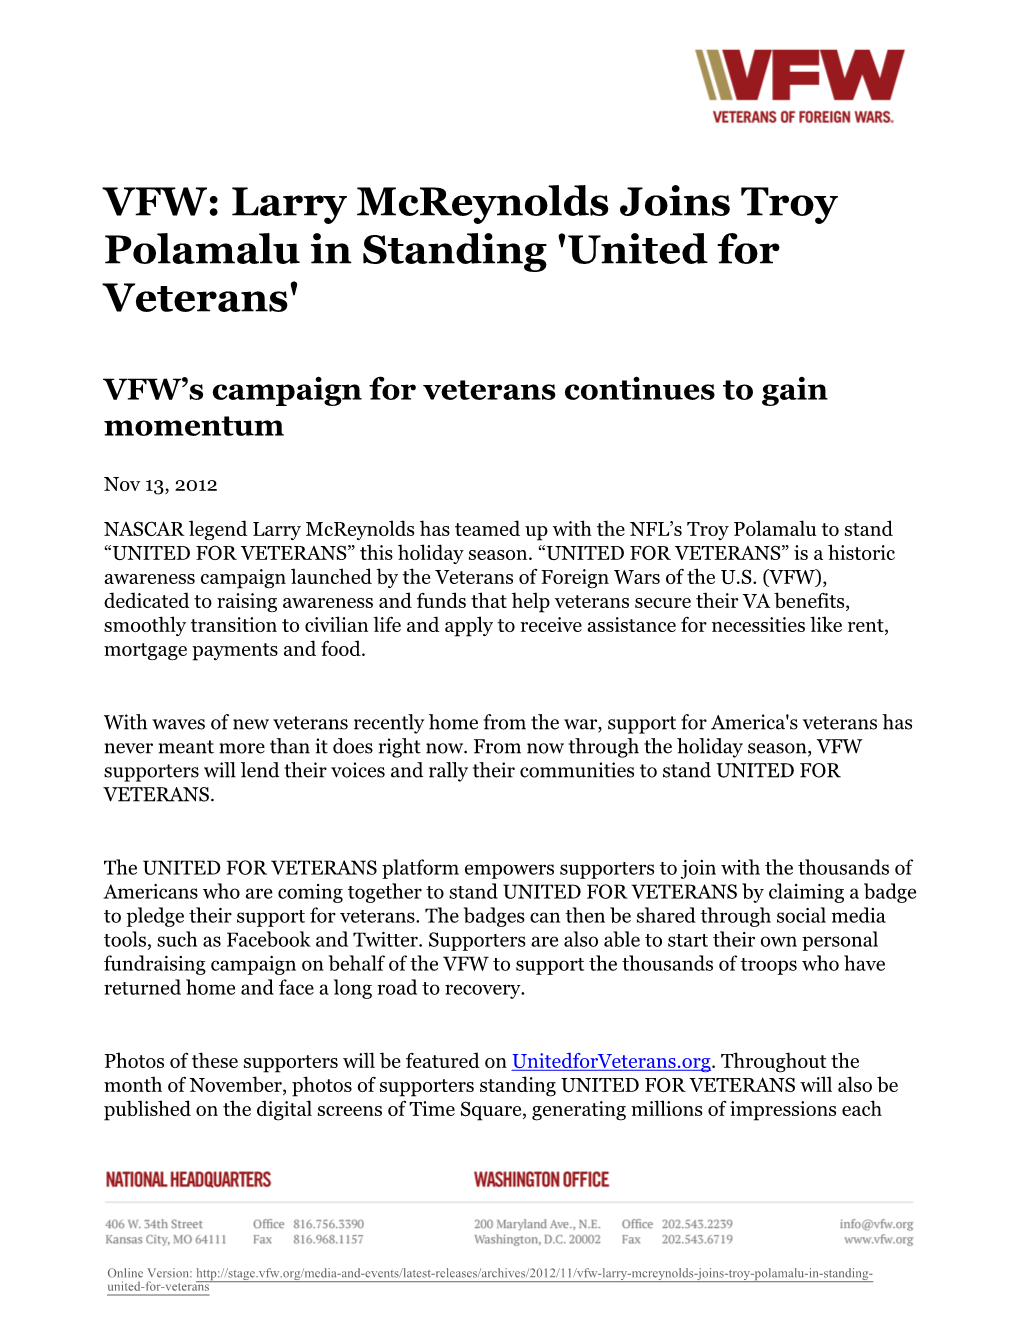 Larry Mcreynolds Joins Troy Polamalu in Standing 'United for Veterans'